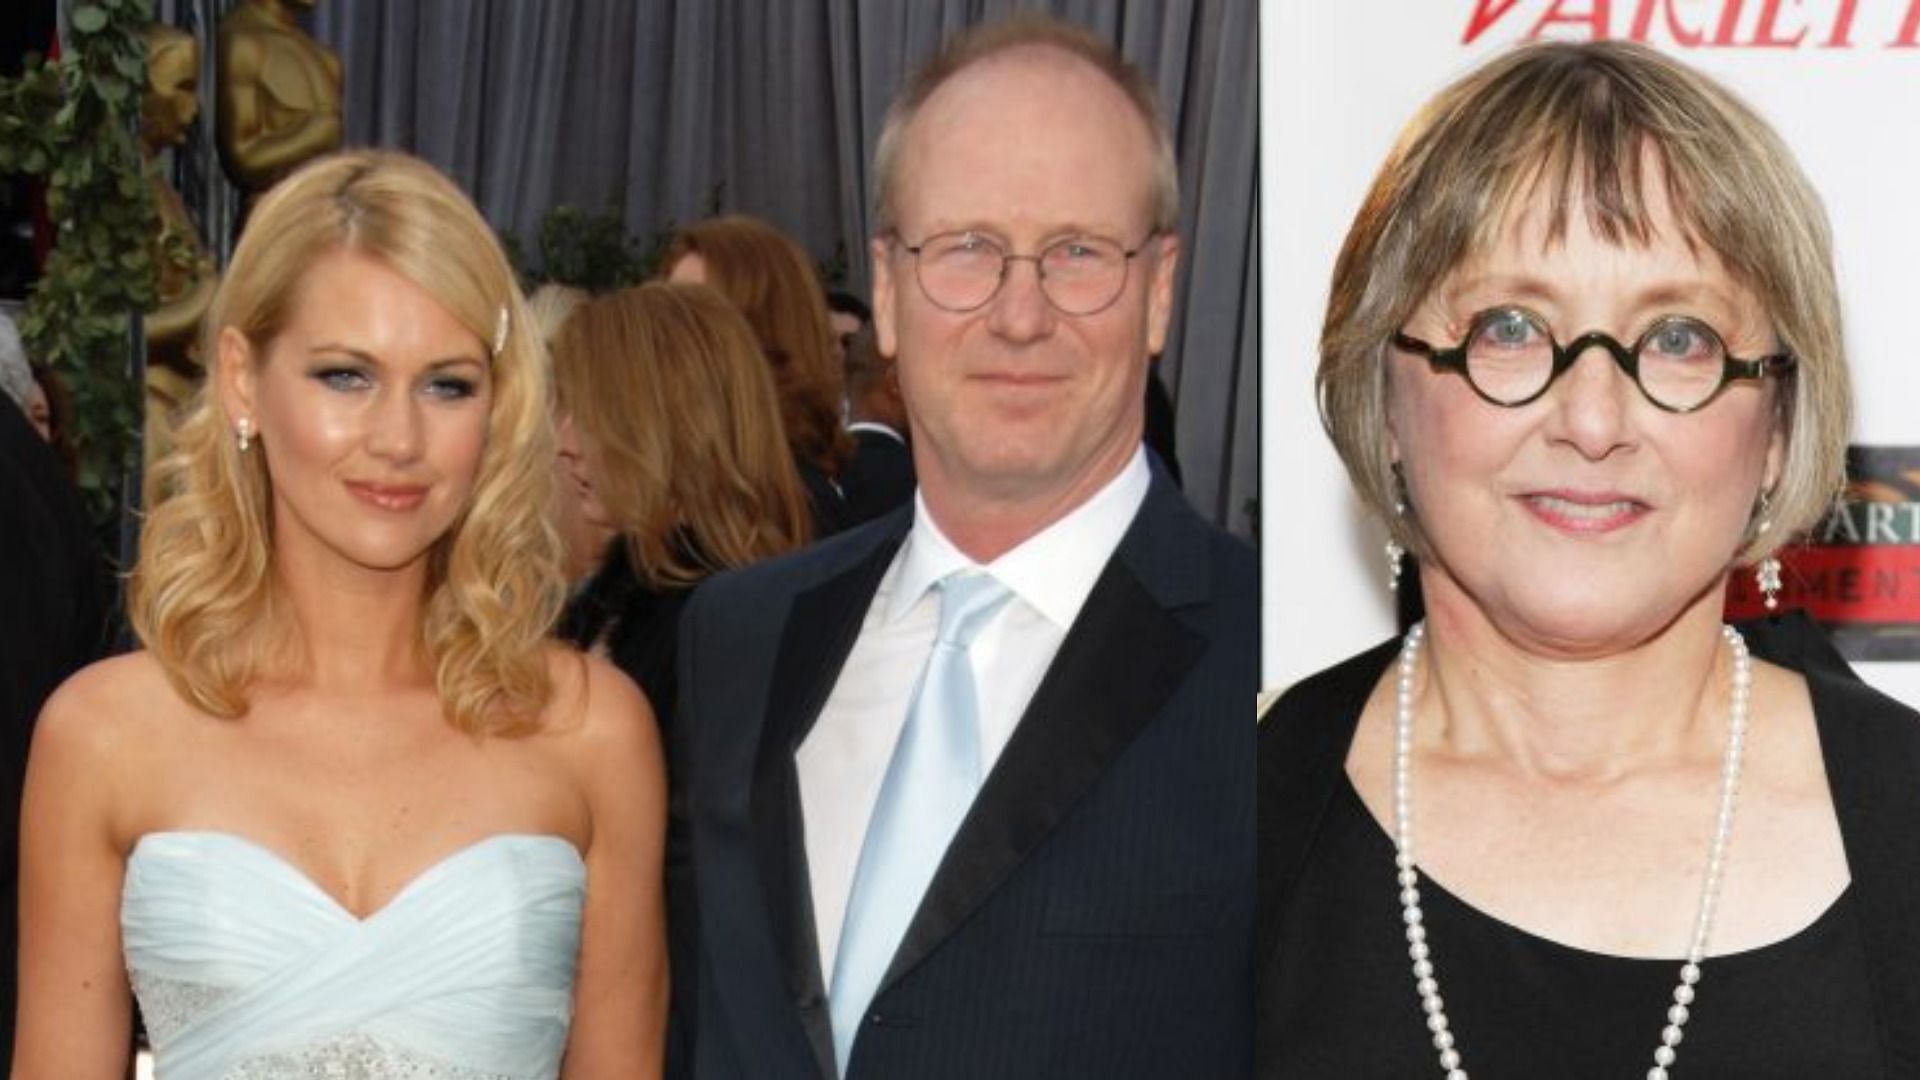 Heidi Henderson, William Hurt, and Mary Beth Hurt (Images via Rich Fury/Shutterstock and Frank Trapper/Corbis)